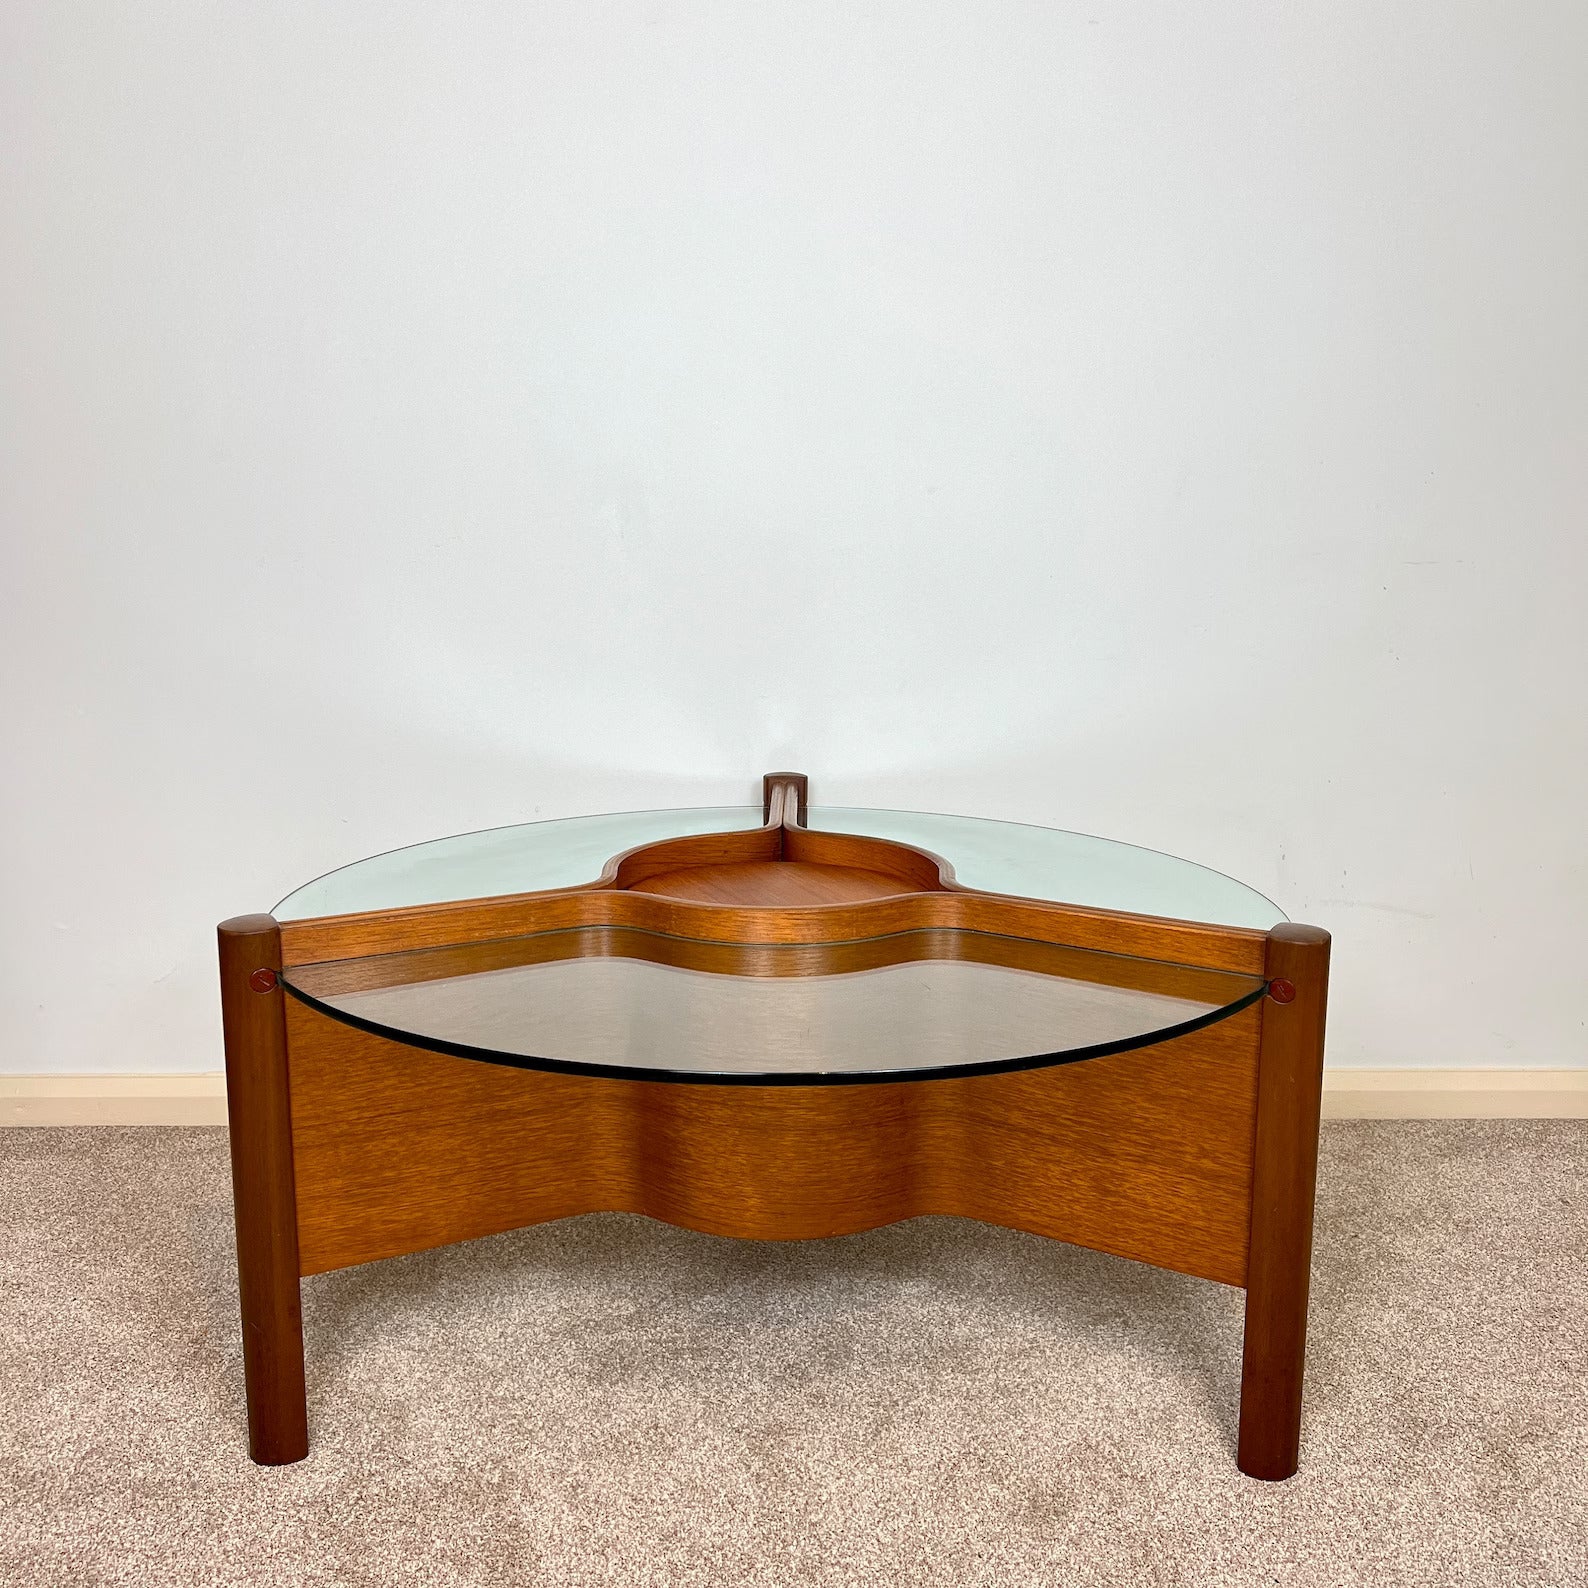 Vintage Circular Glass Top Coffee Table, 1960s Mid-Century Modern Round Coffee Table